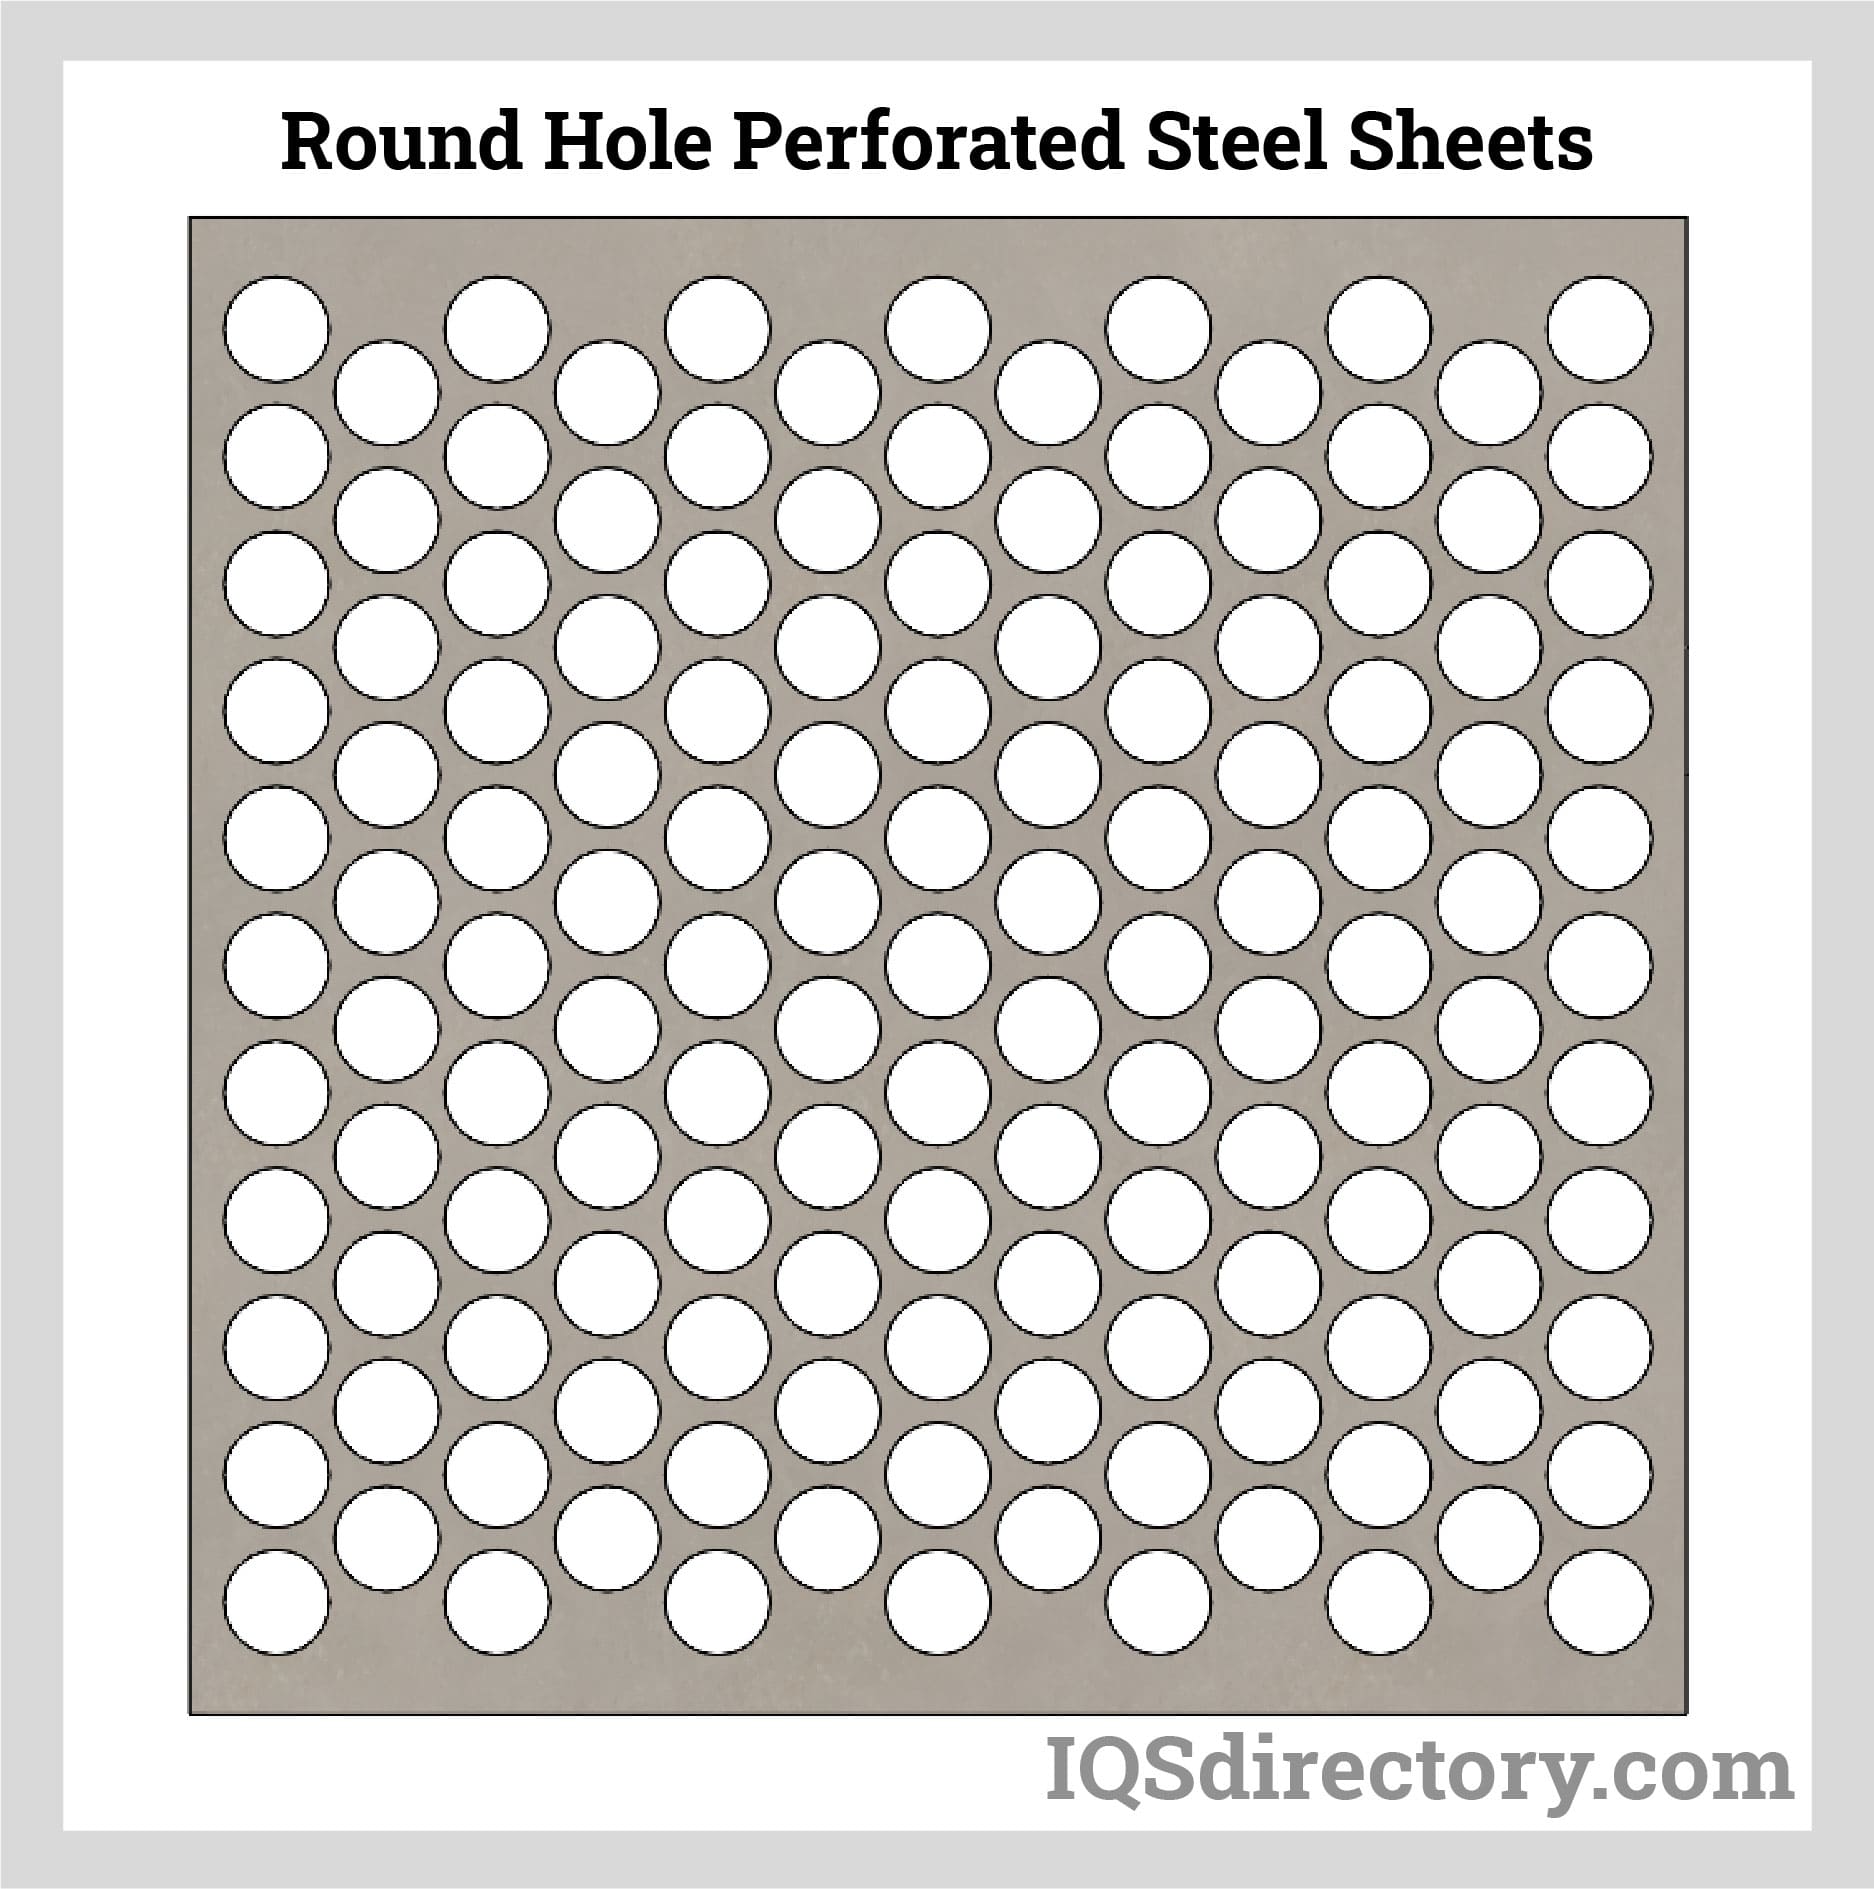 Round Hole Perforated Steel Sheets